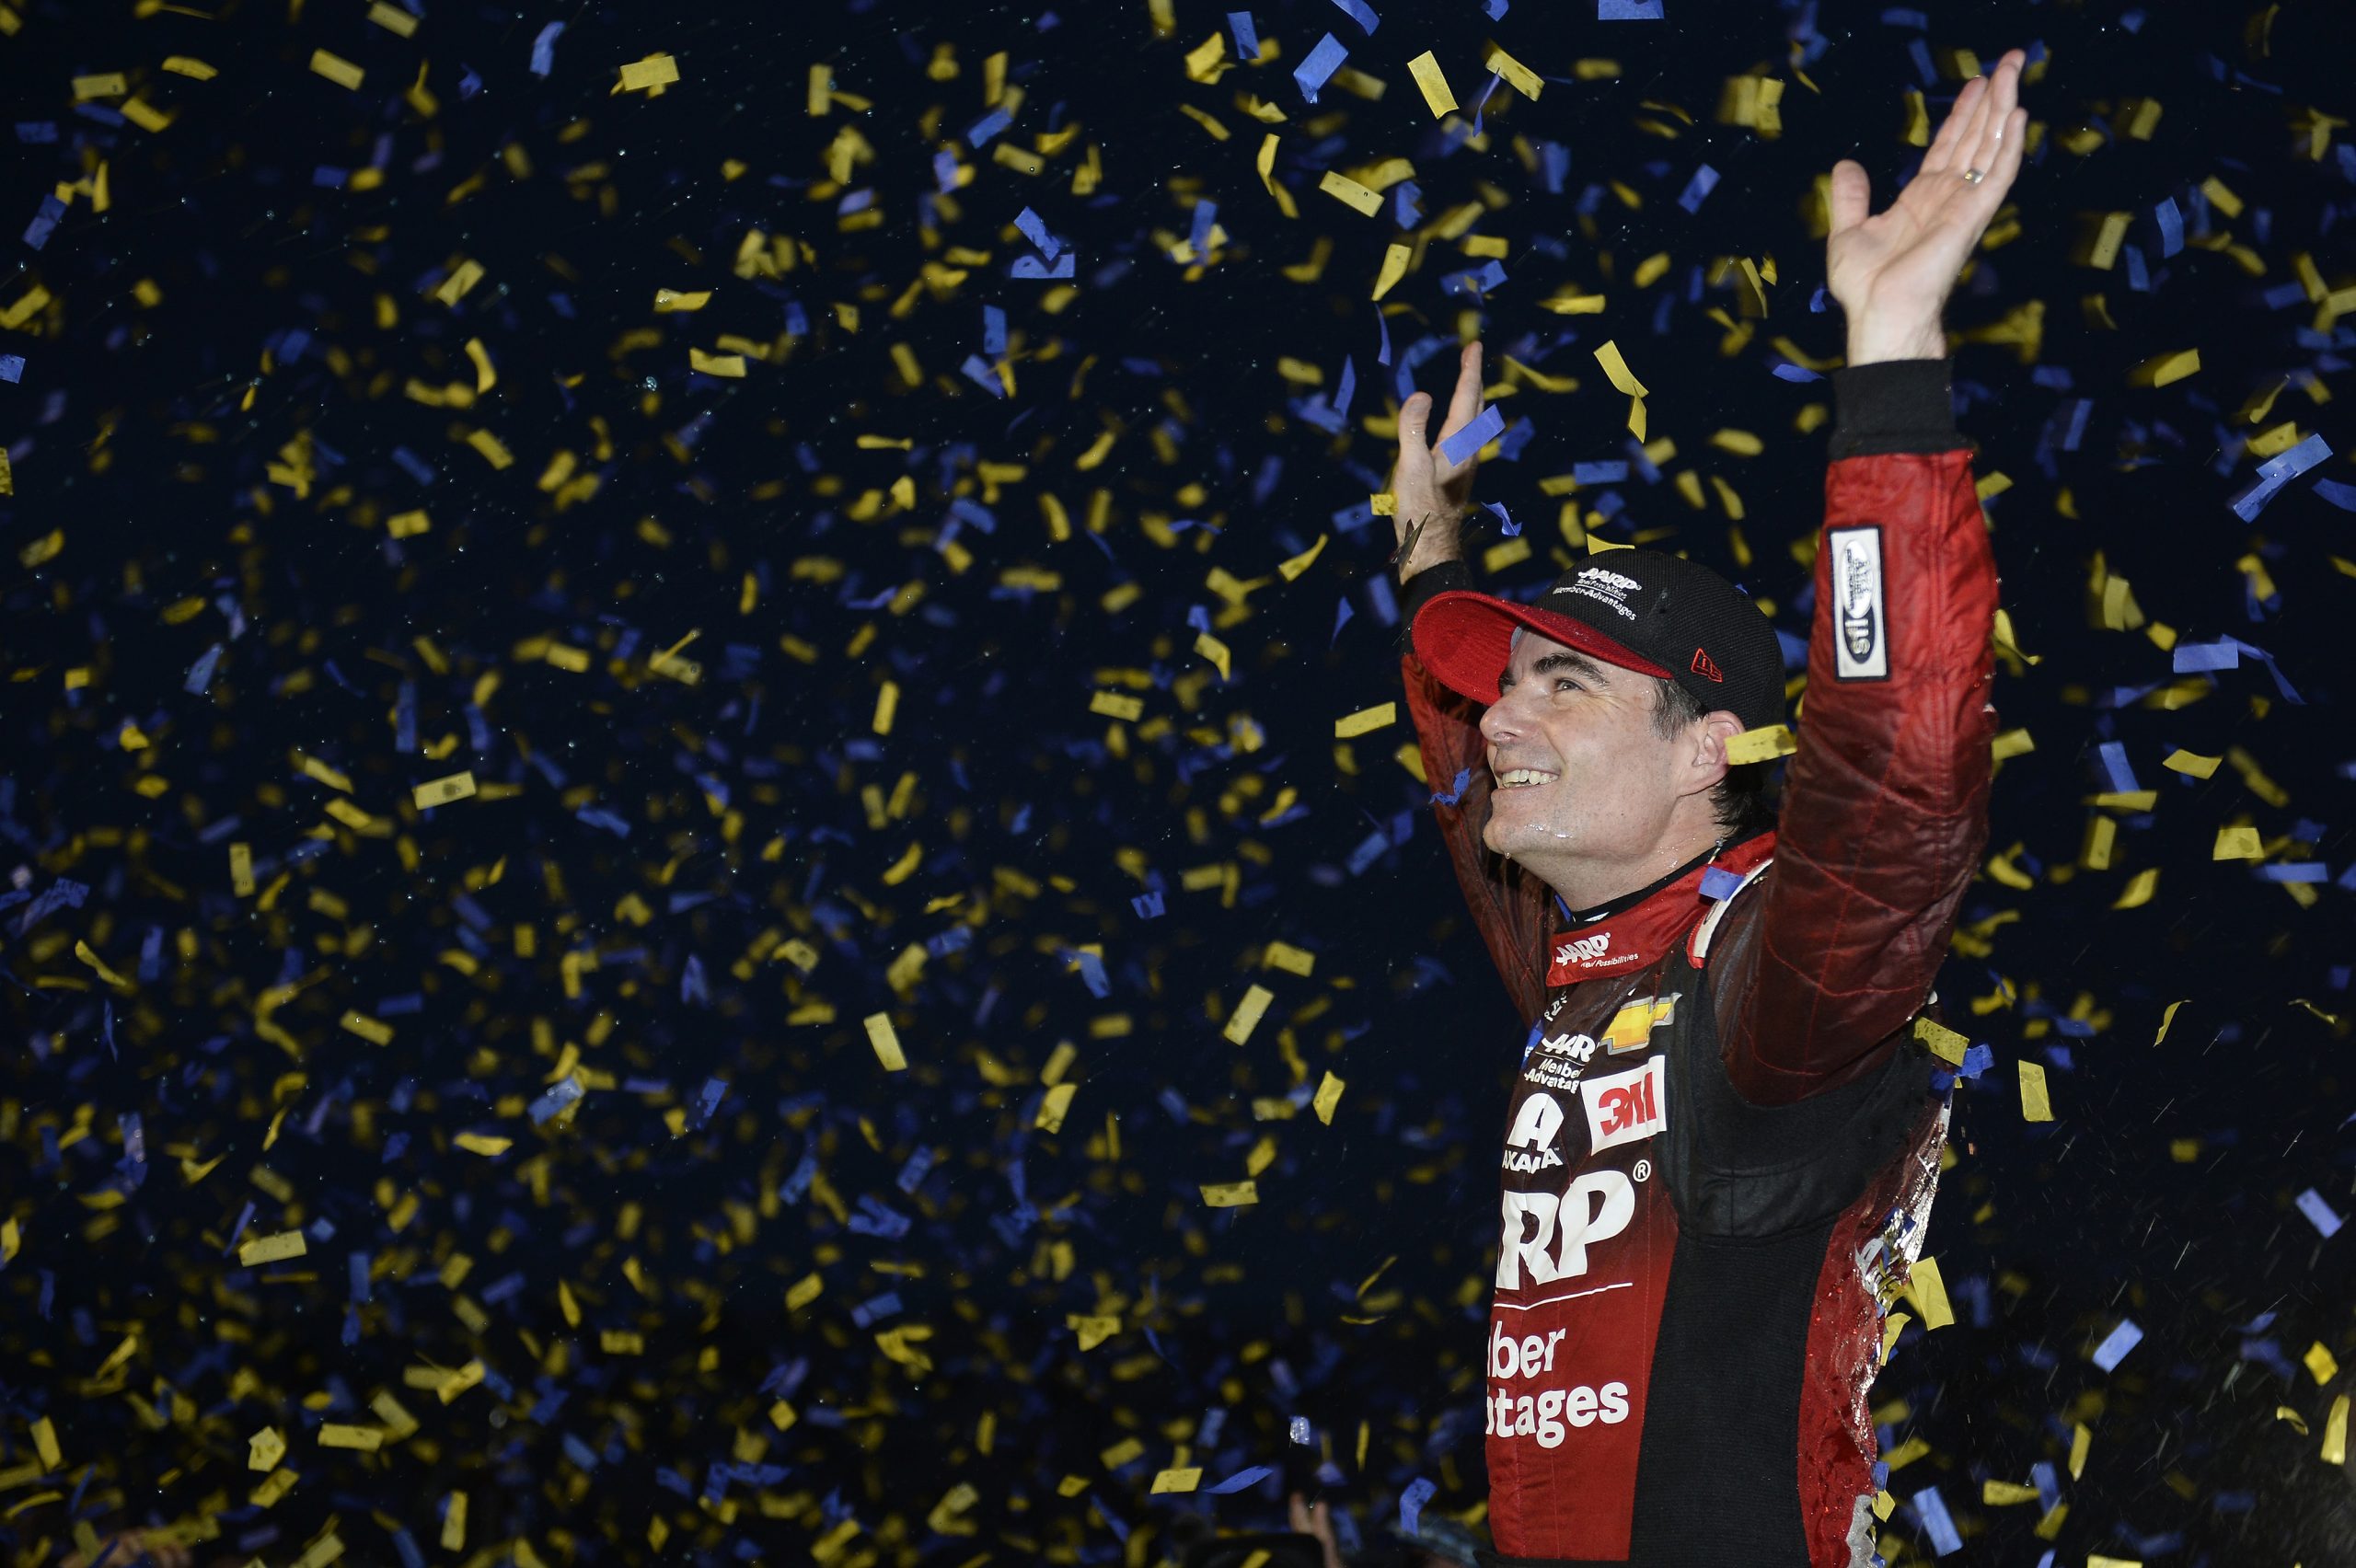 Gordon celebrates his final NASCAR Cup Series win, embracing the cheers from fans who previously booed him at Martinsville Speedway. (Photo: John Harrelson | Nigel Kinrade Photography via Hendrick Motorsports)